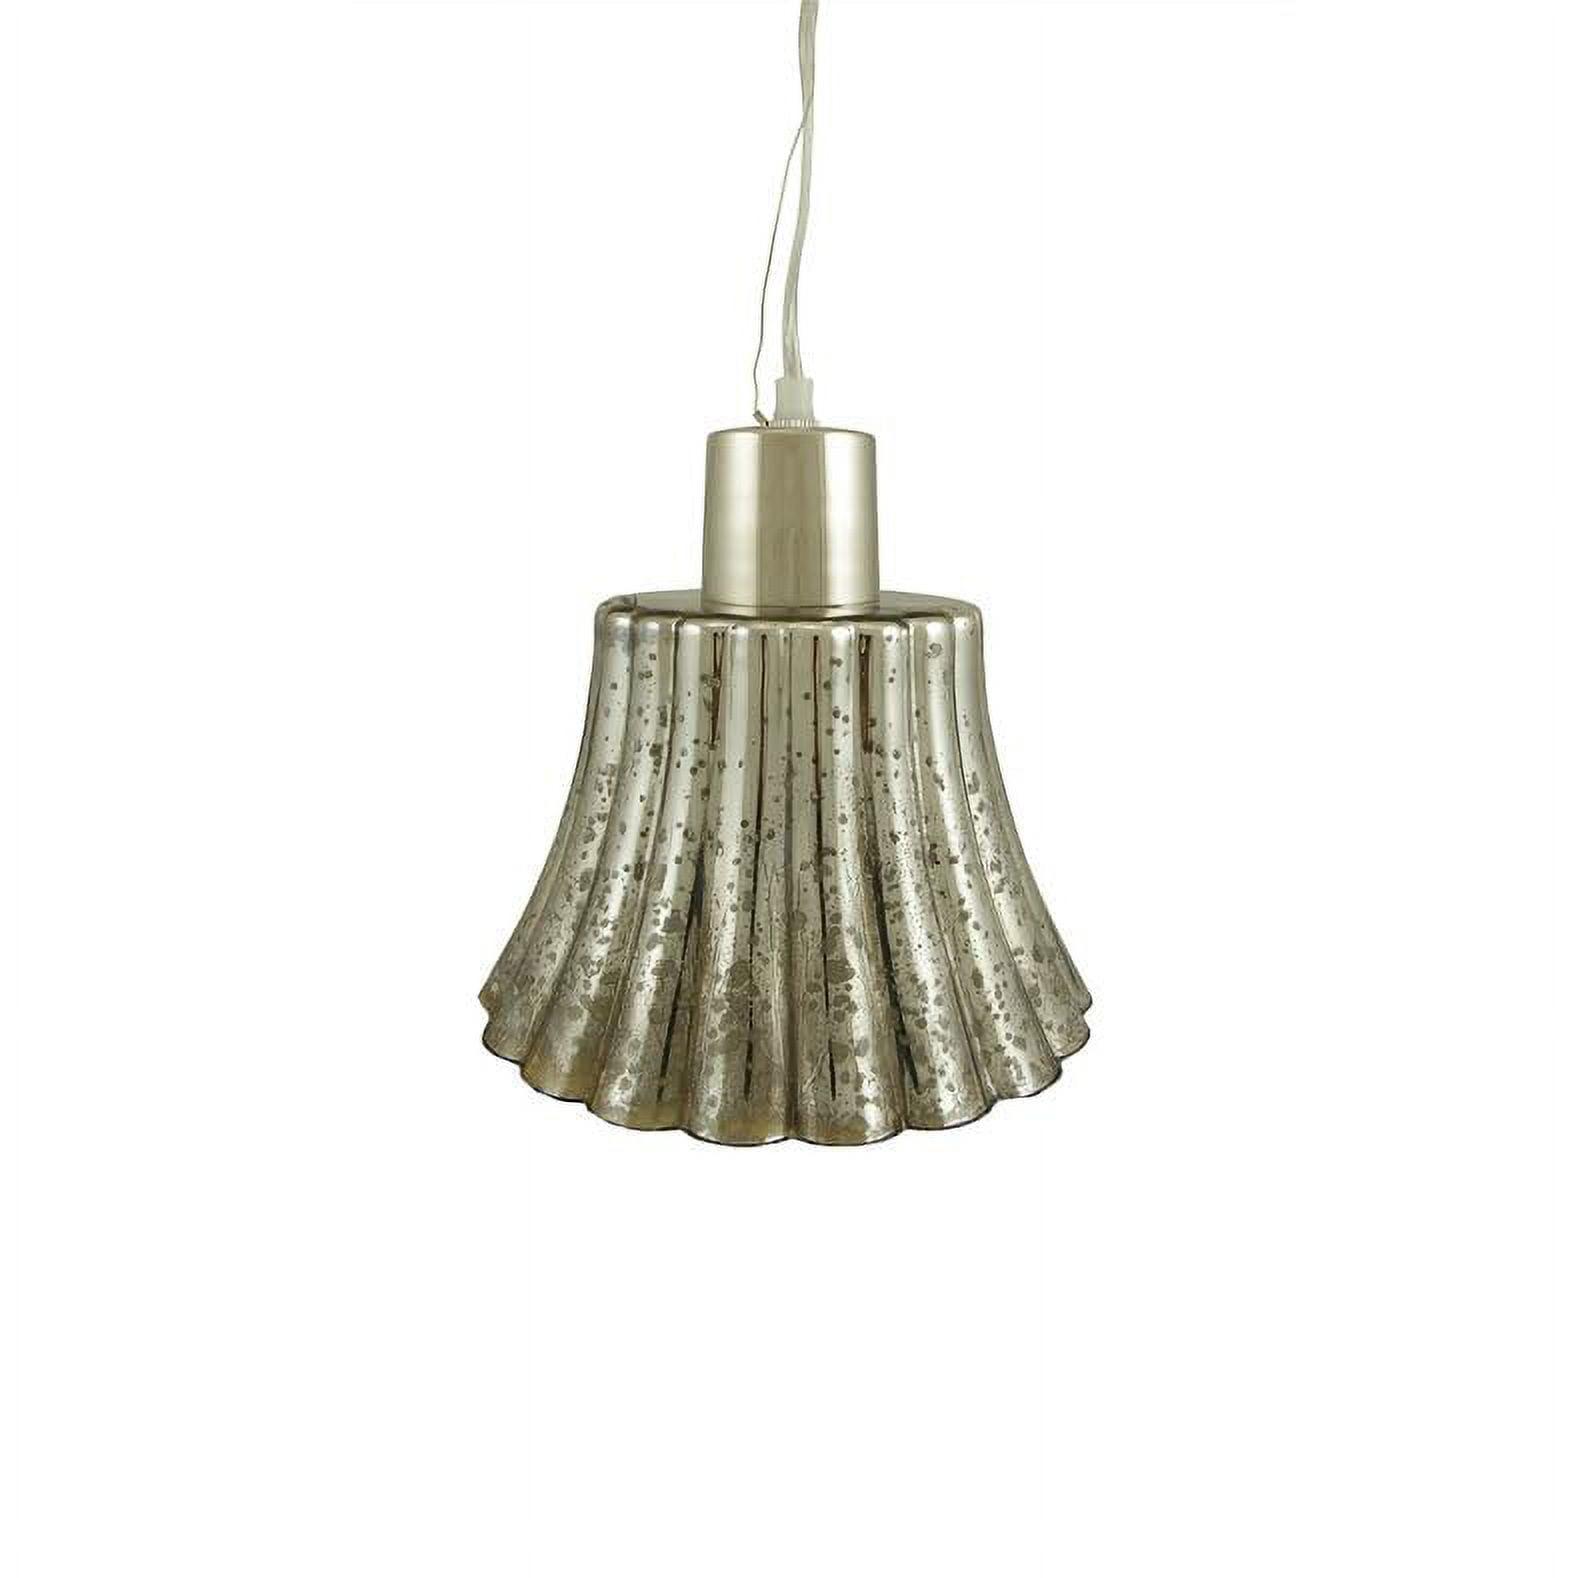 Antique Mercury Fluted Glass Pendant Lamp with Silver Ceiling Cap